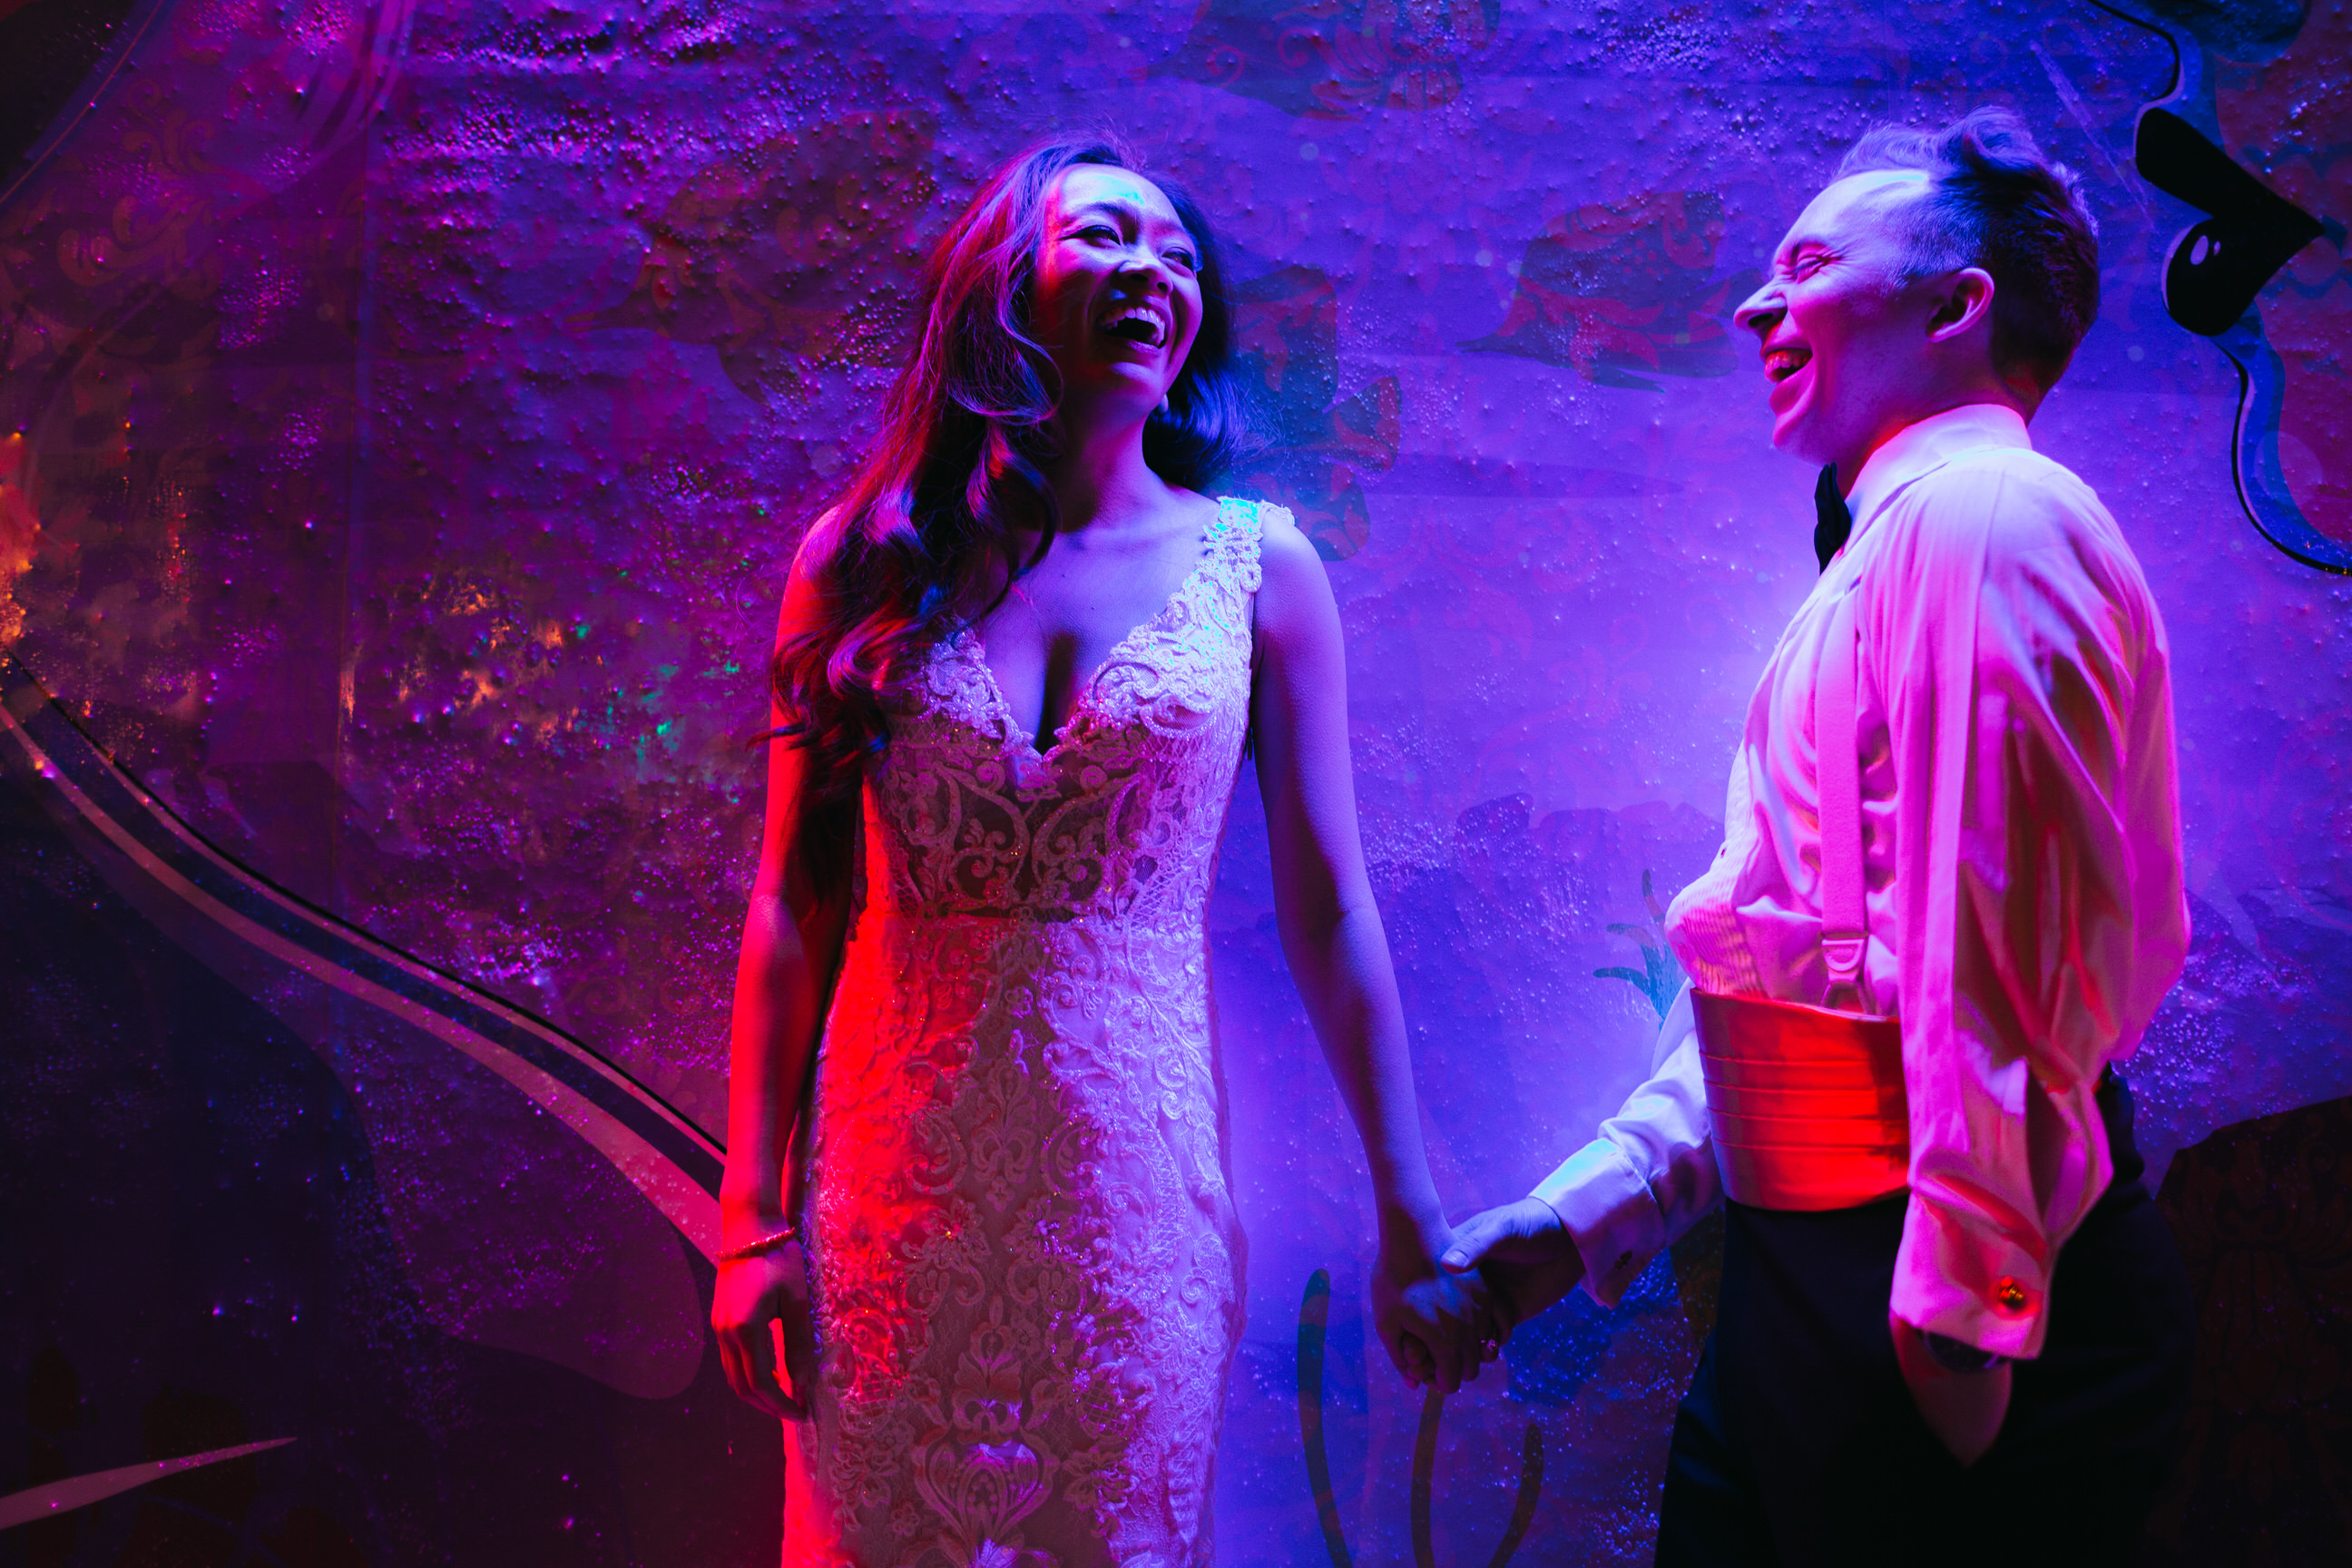 A wedding couple laughs and holds hands under a purple light.